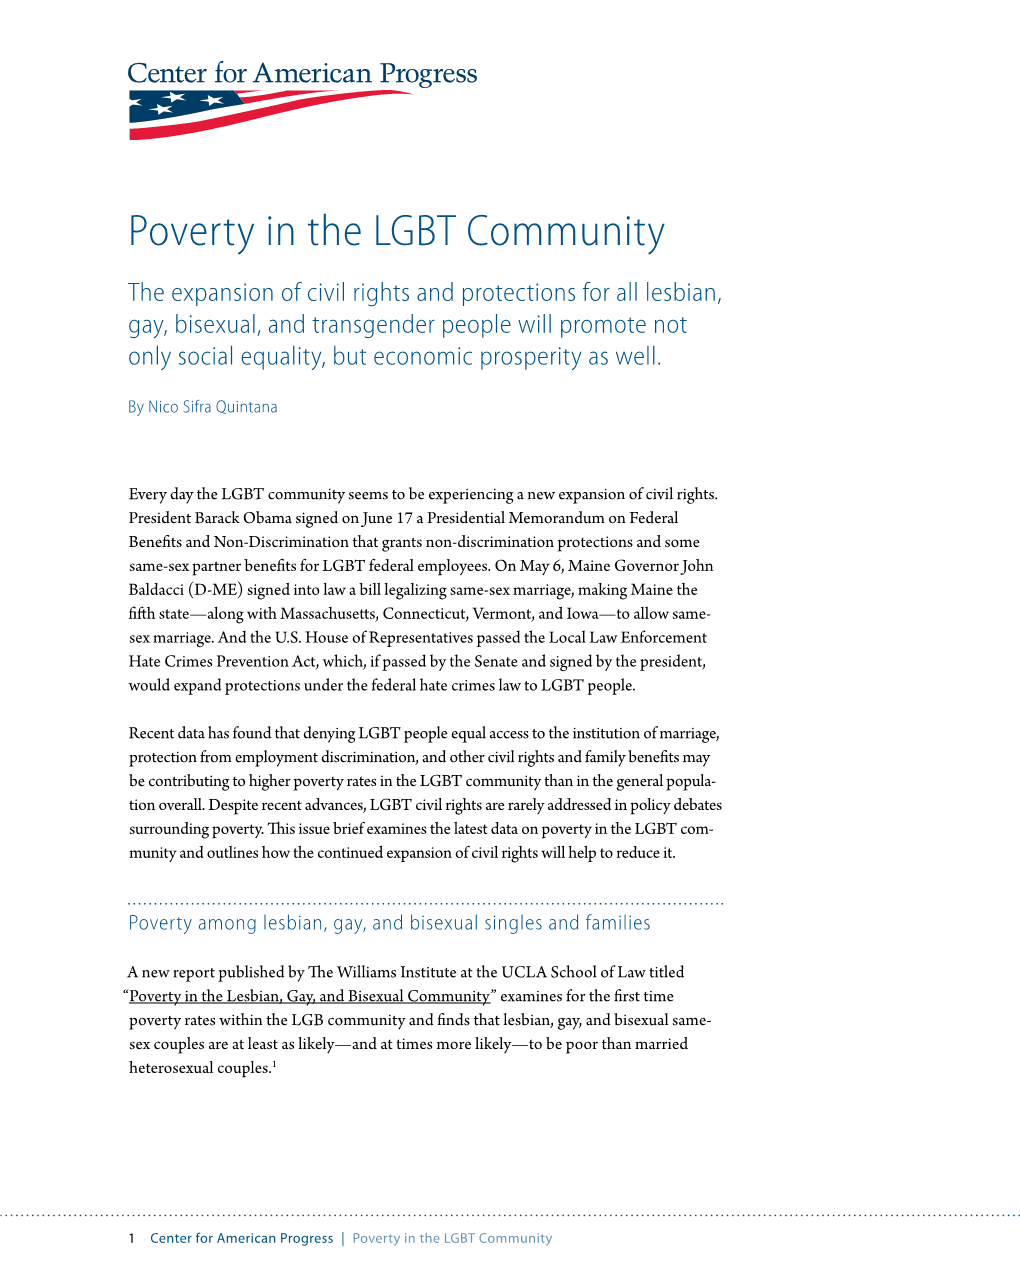 Poverty in the LGBT Community